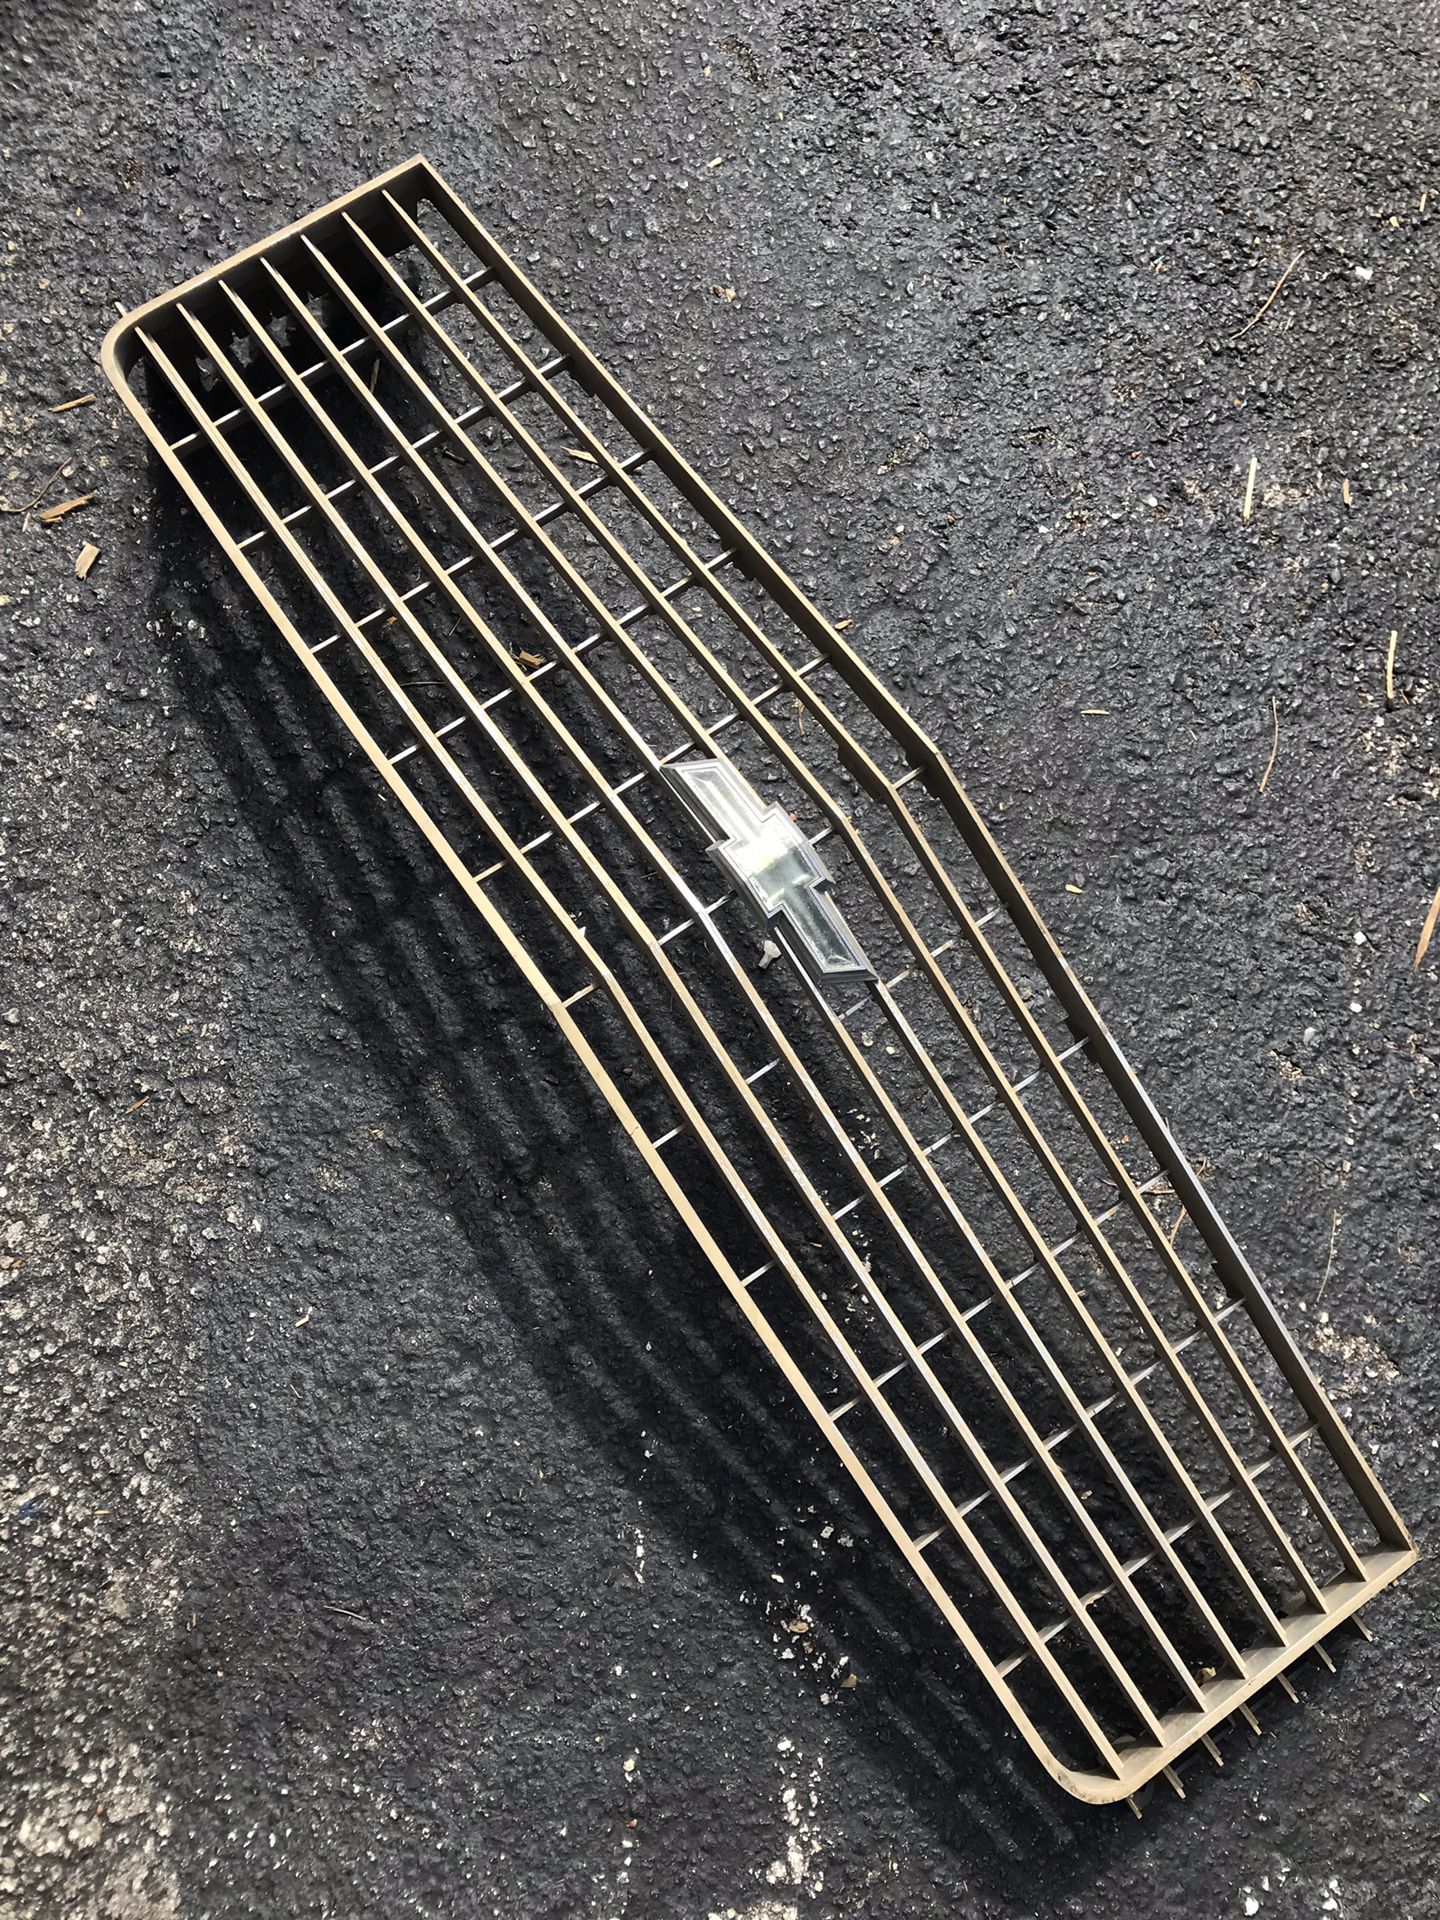 1975 CHEVROLET IMPALA GRILLE 75 GRILL DONK